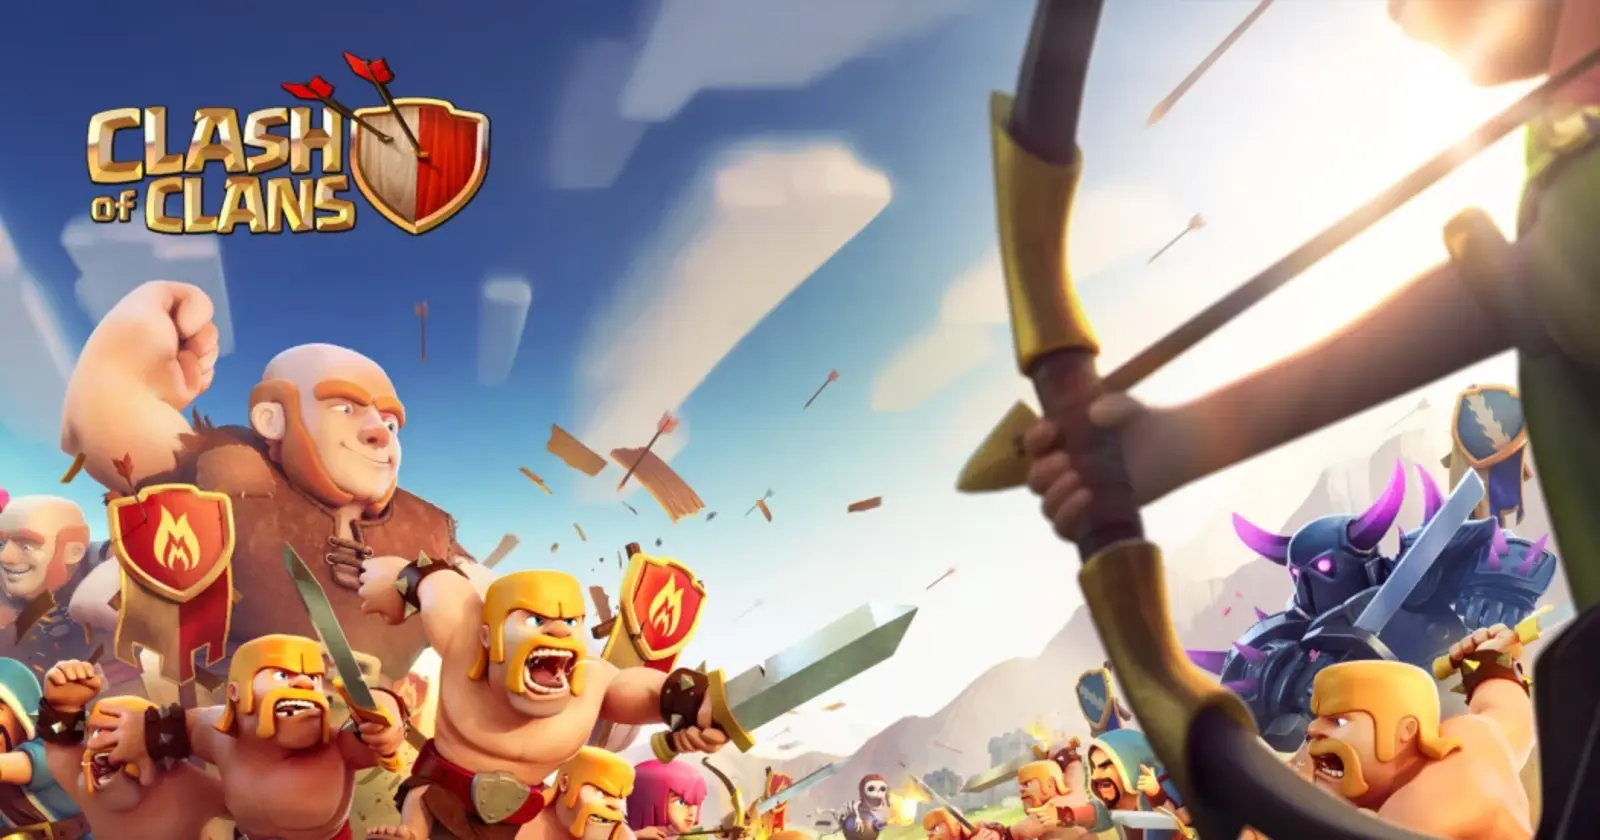 Fix in works for Clash of Clans 'out of sync' error in Ranked and Legend League